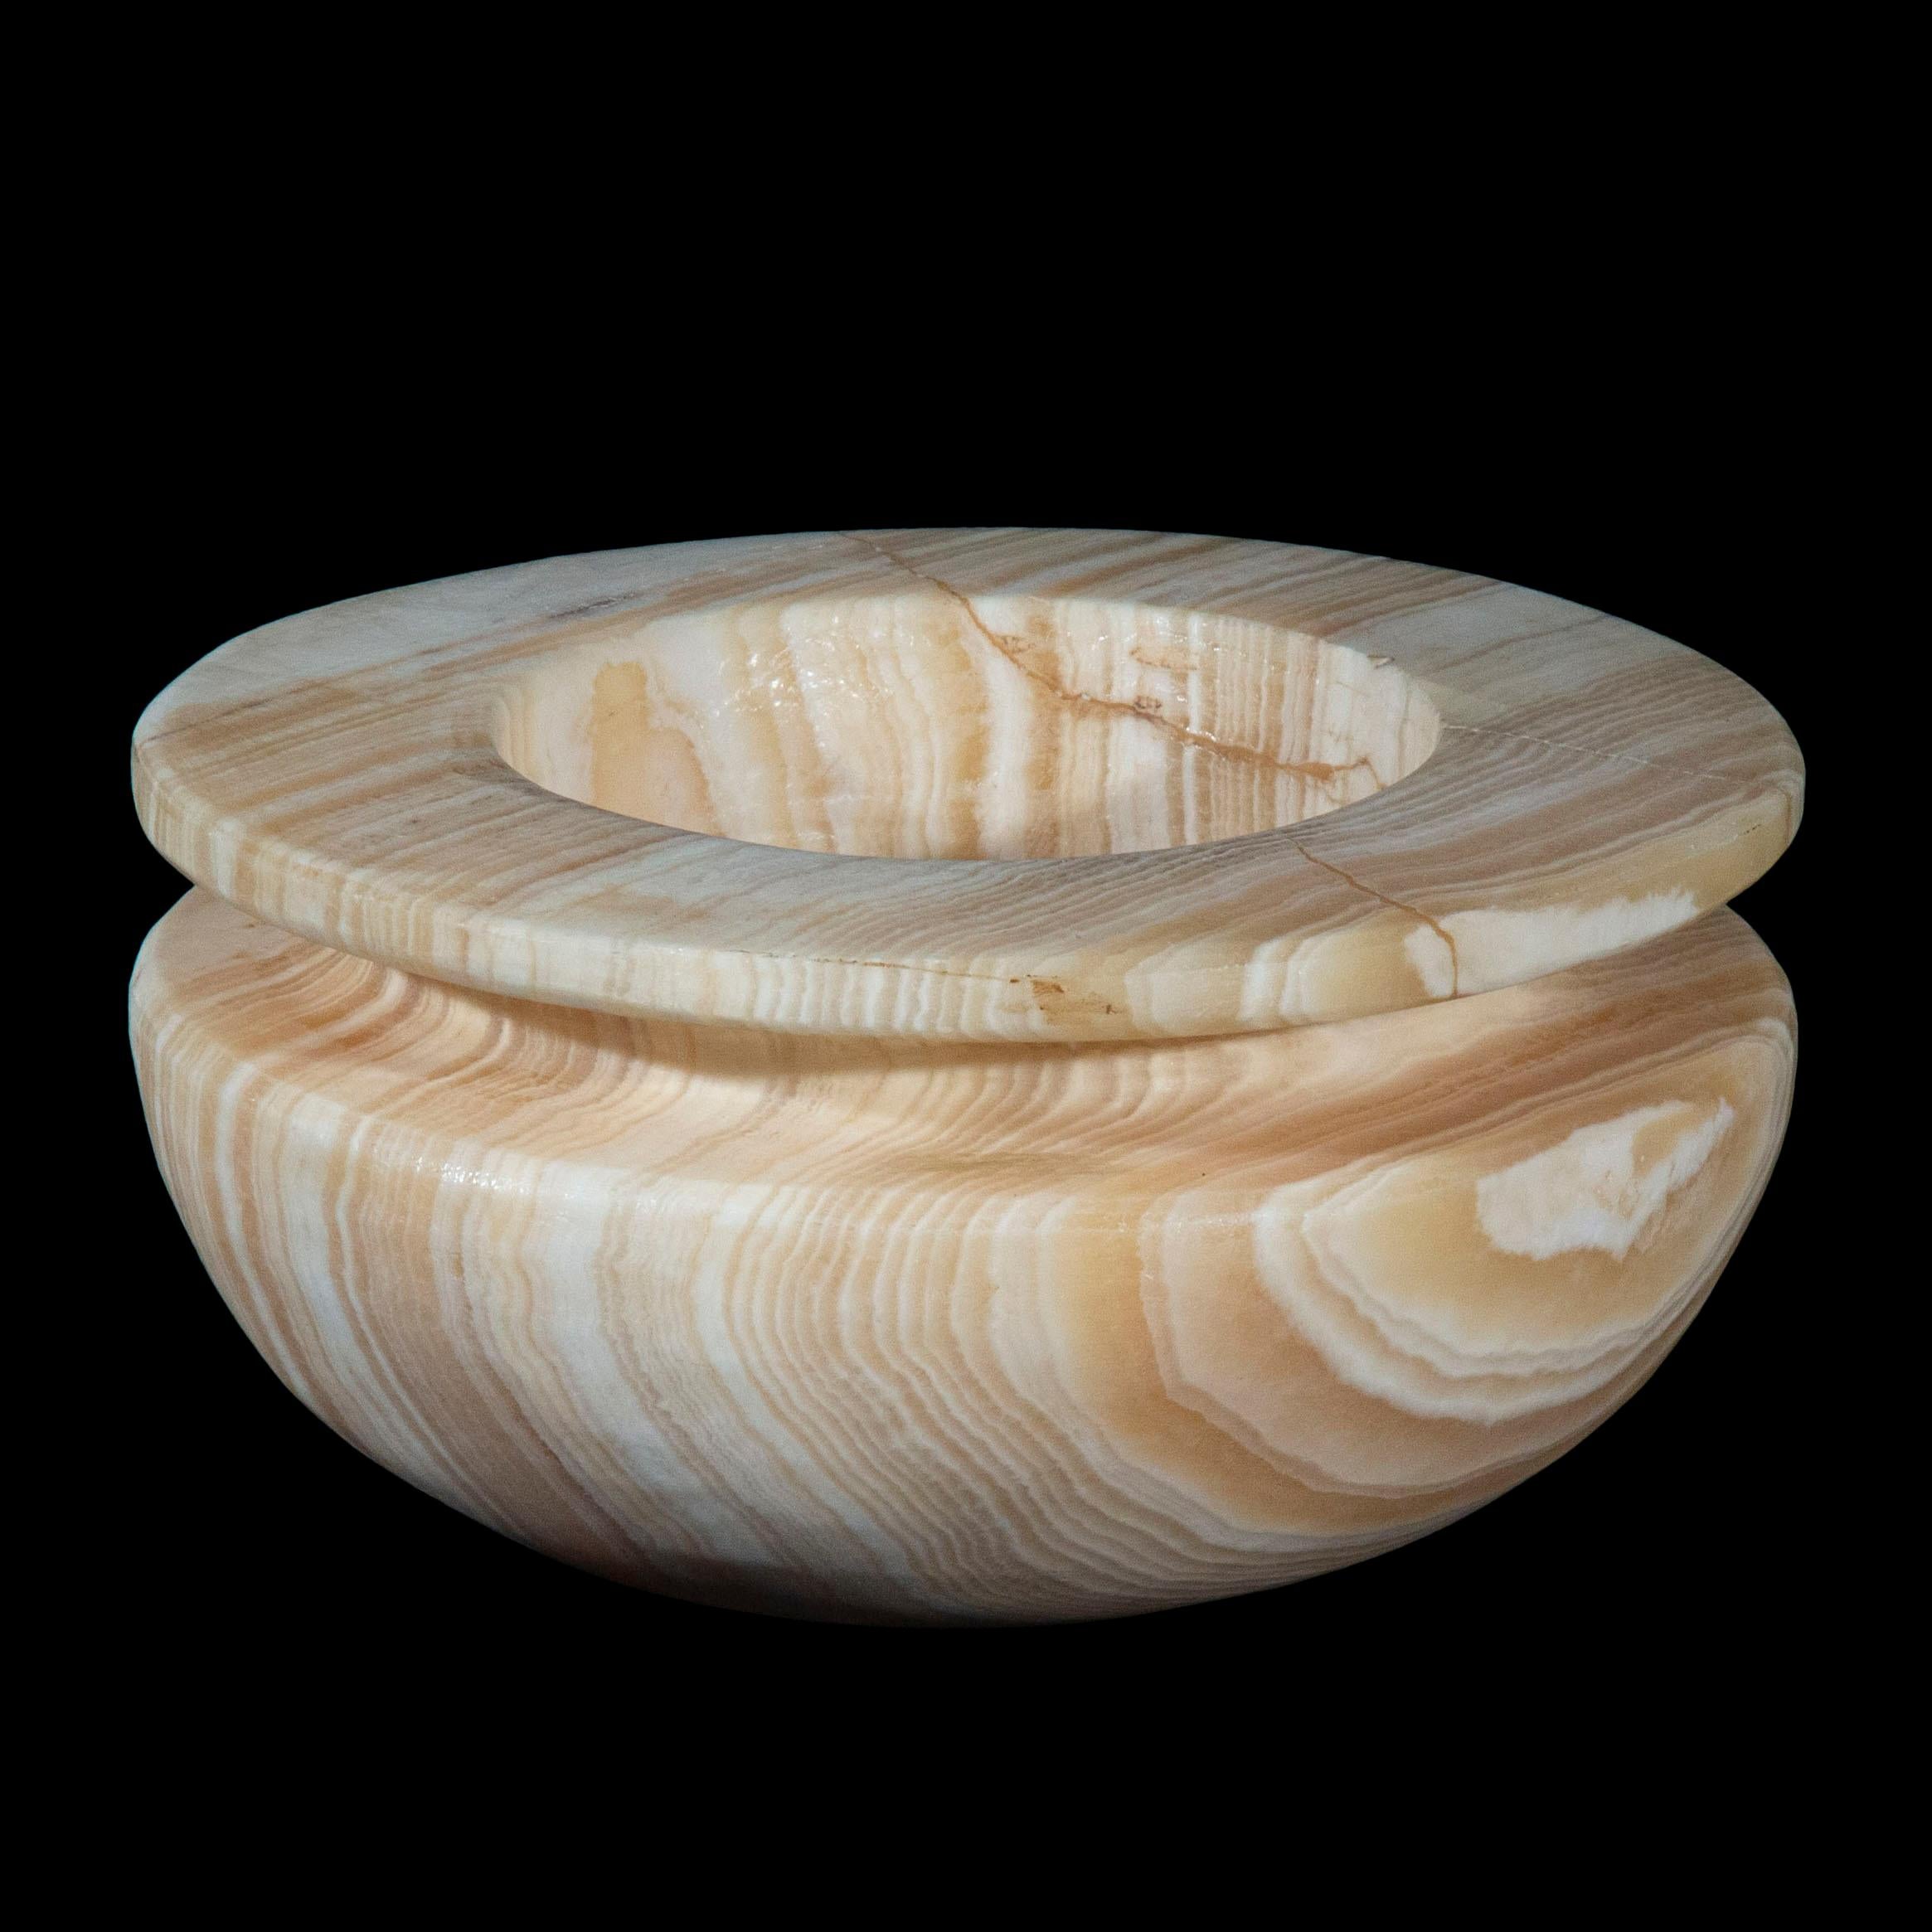 An interesting Egyptian alabaster vessel,
Possibly 19th century in the style of Old Kingdom (2686-2160 BC).

Why we like it
The large size, smart shape and dramatic veining make this unusual vessel very decorative and suited for a variety of